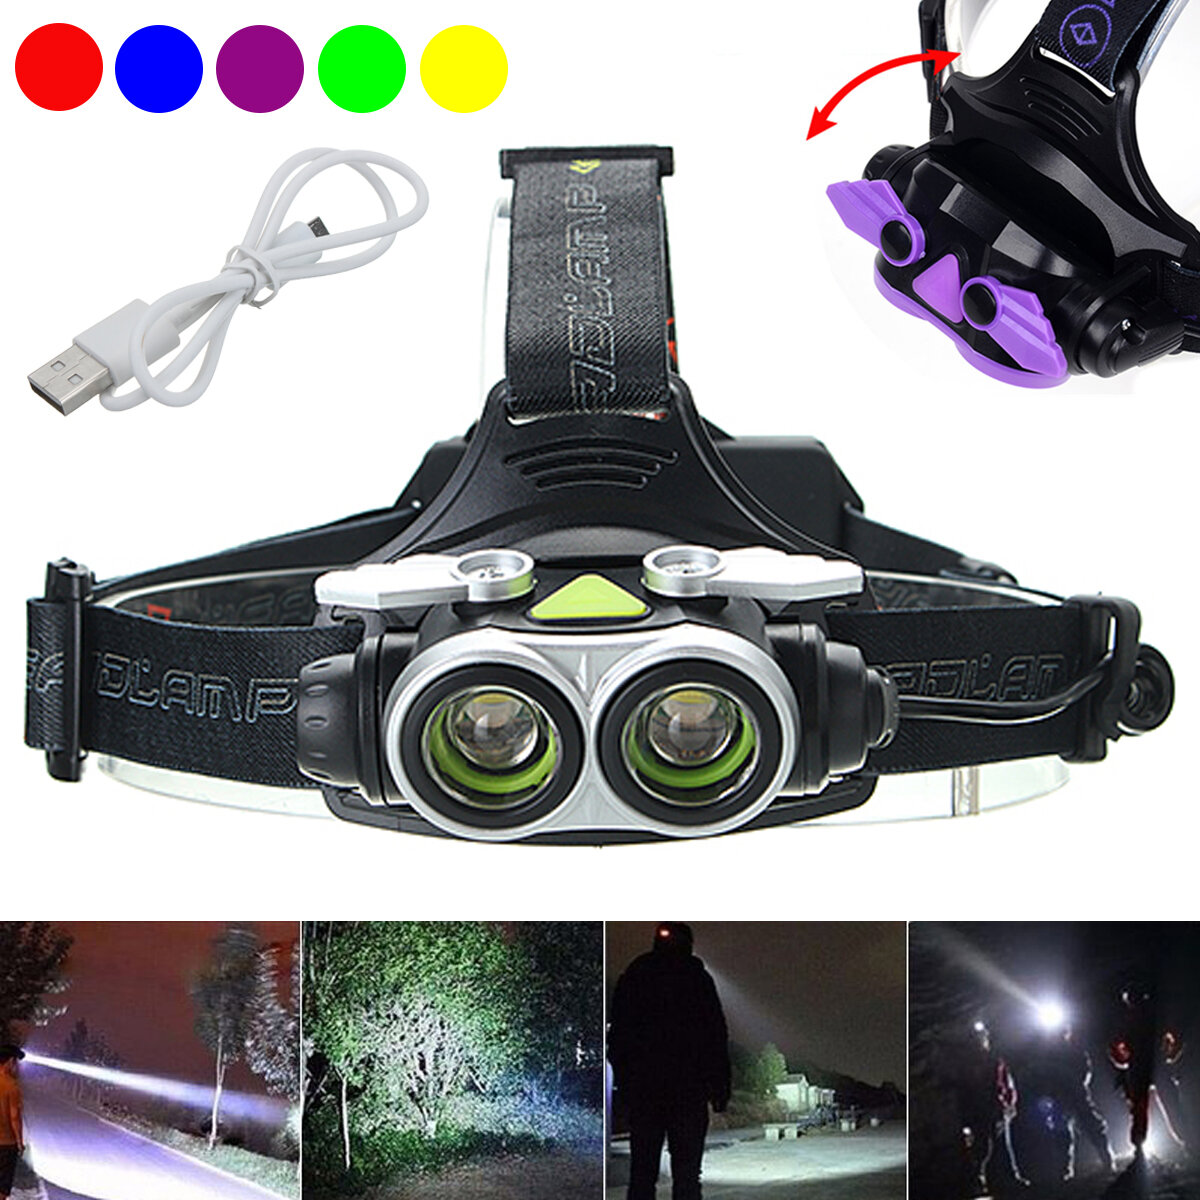 

XANES® 7305-B 4-Modes 2xT6 LED USB Rechargeable Headlamp Outdoor Waterproof Head Torch Ultra Bright Search Head Light